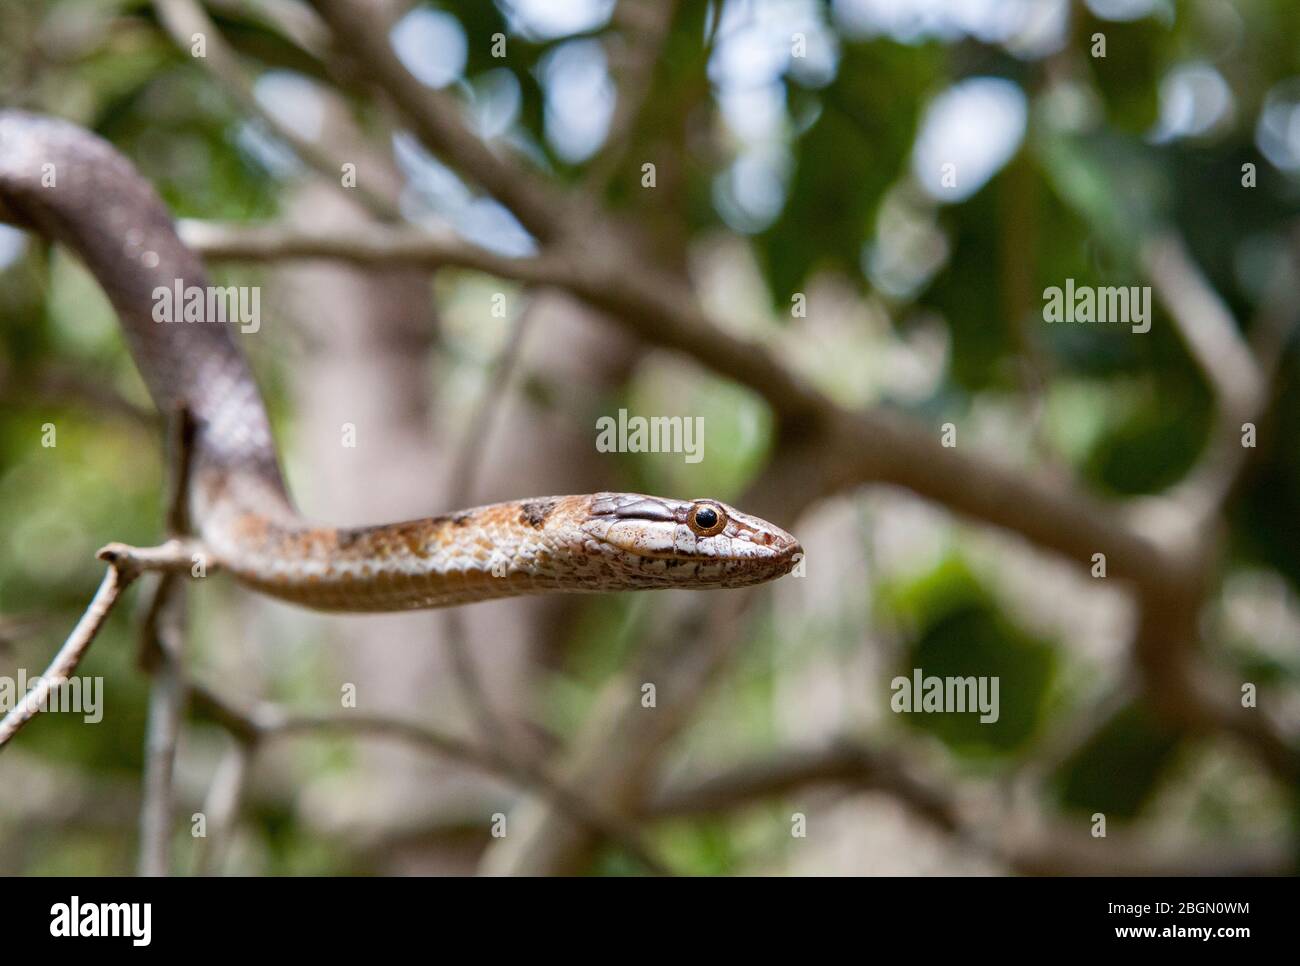 A Bahamian racer (Cubophis vudii) snake slithers among the branches of trees in a forest on Long Island in the Bahamas Stock Photo